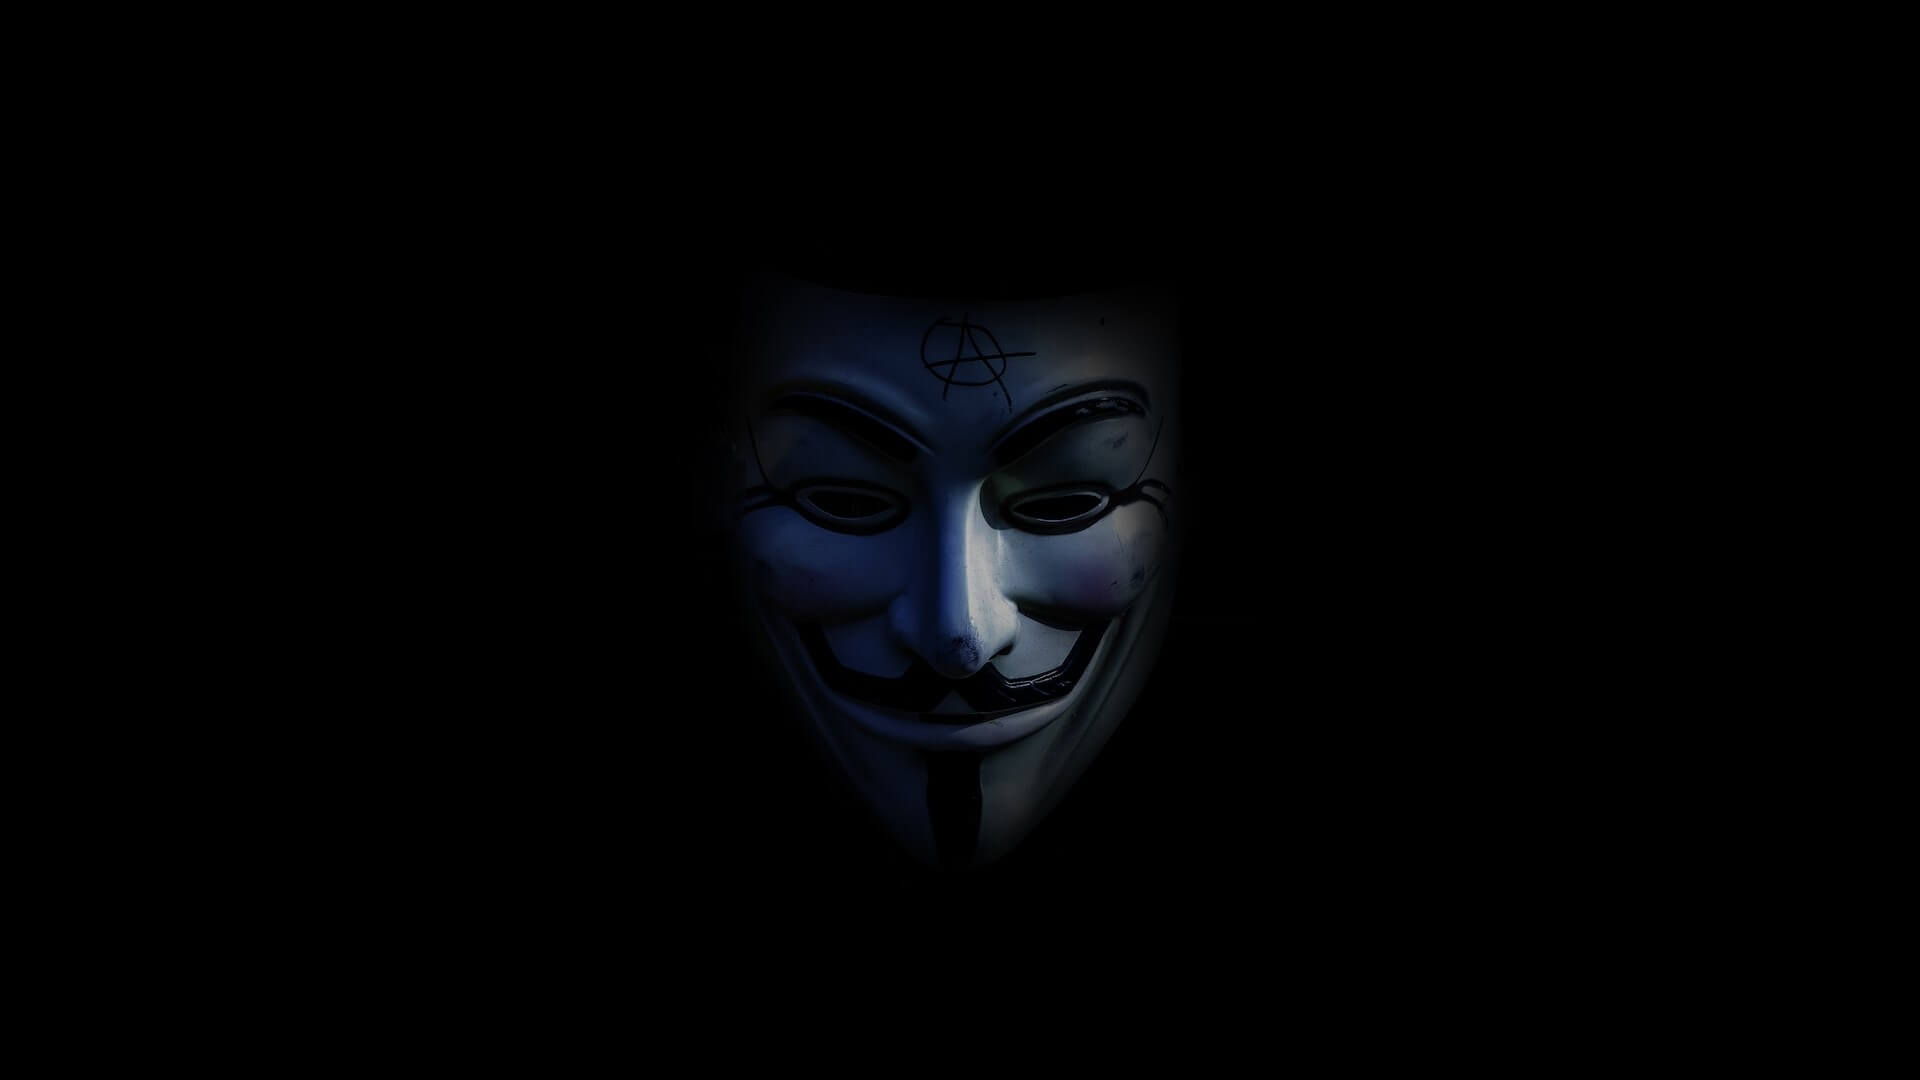 A theatrical mask resembling a face with a mustache, set against a dark and mysterious backdrop.